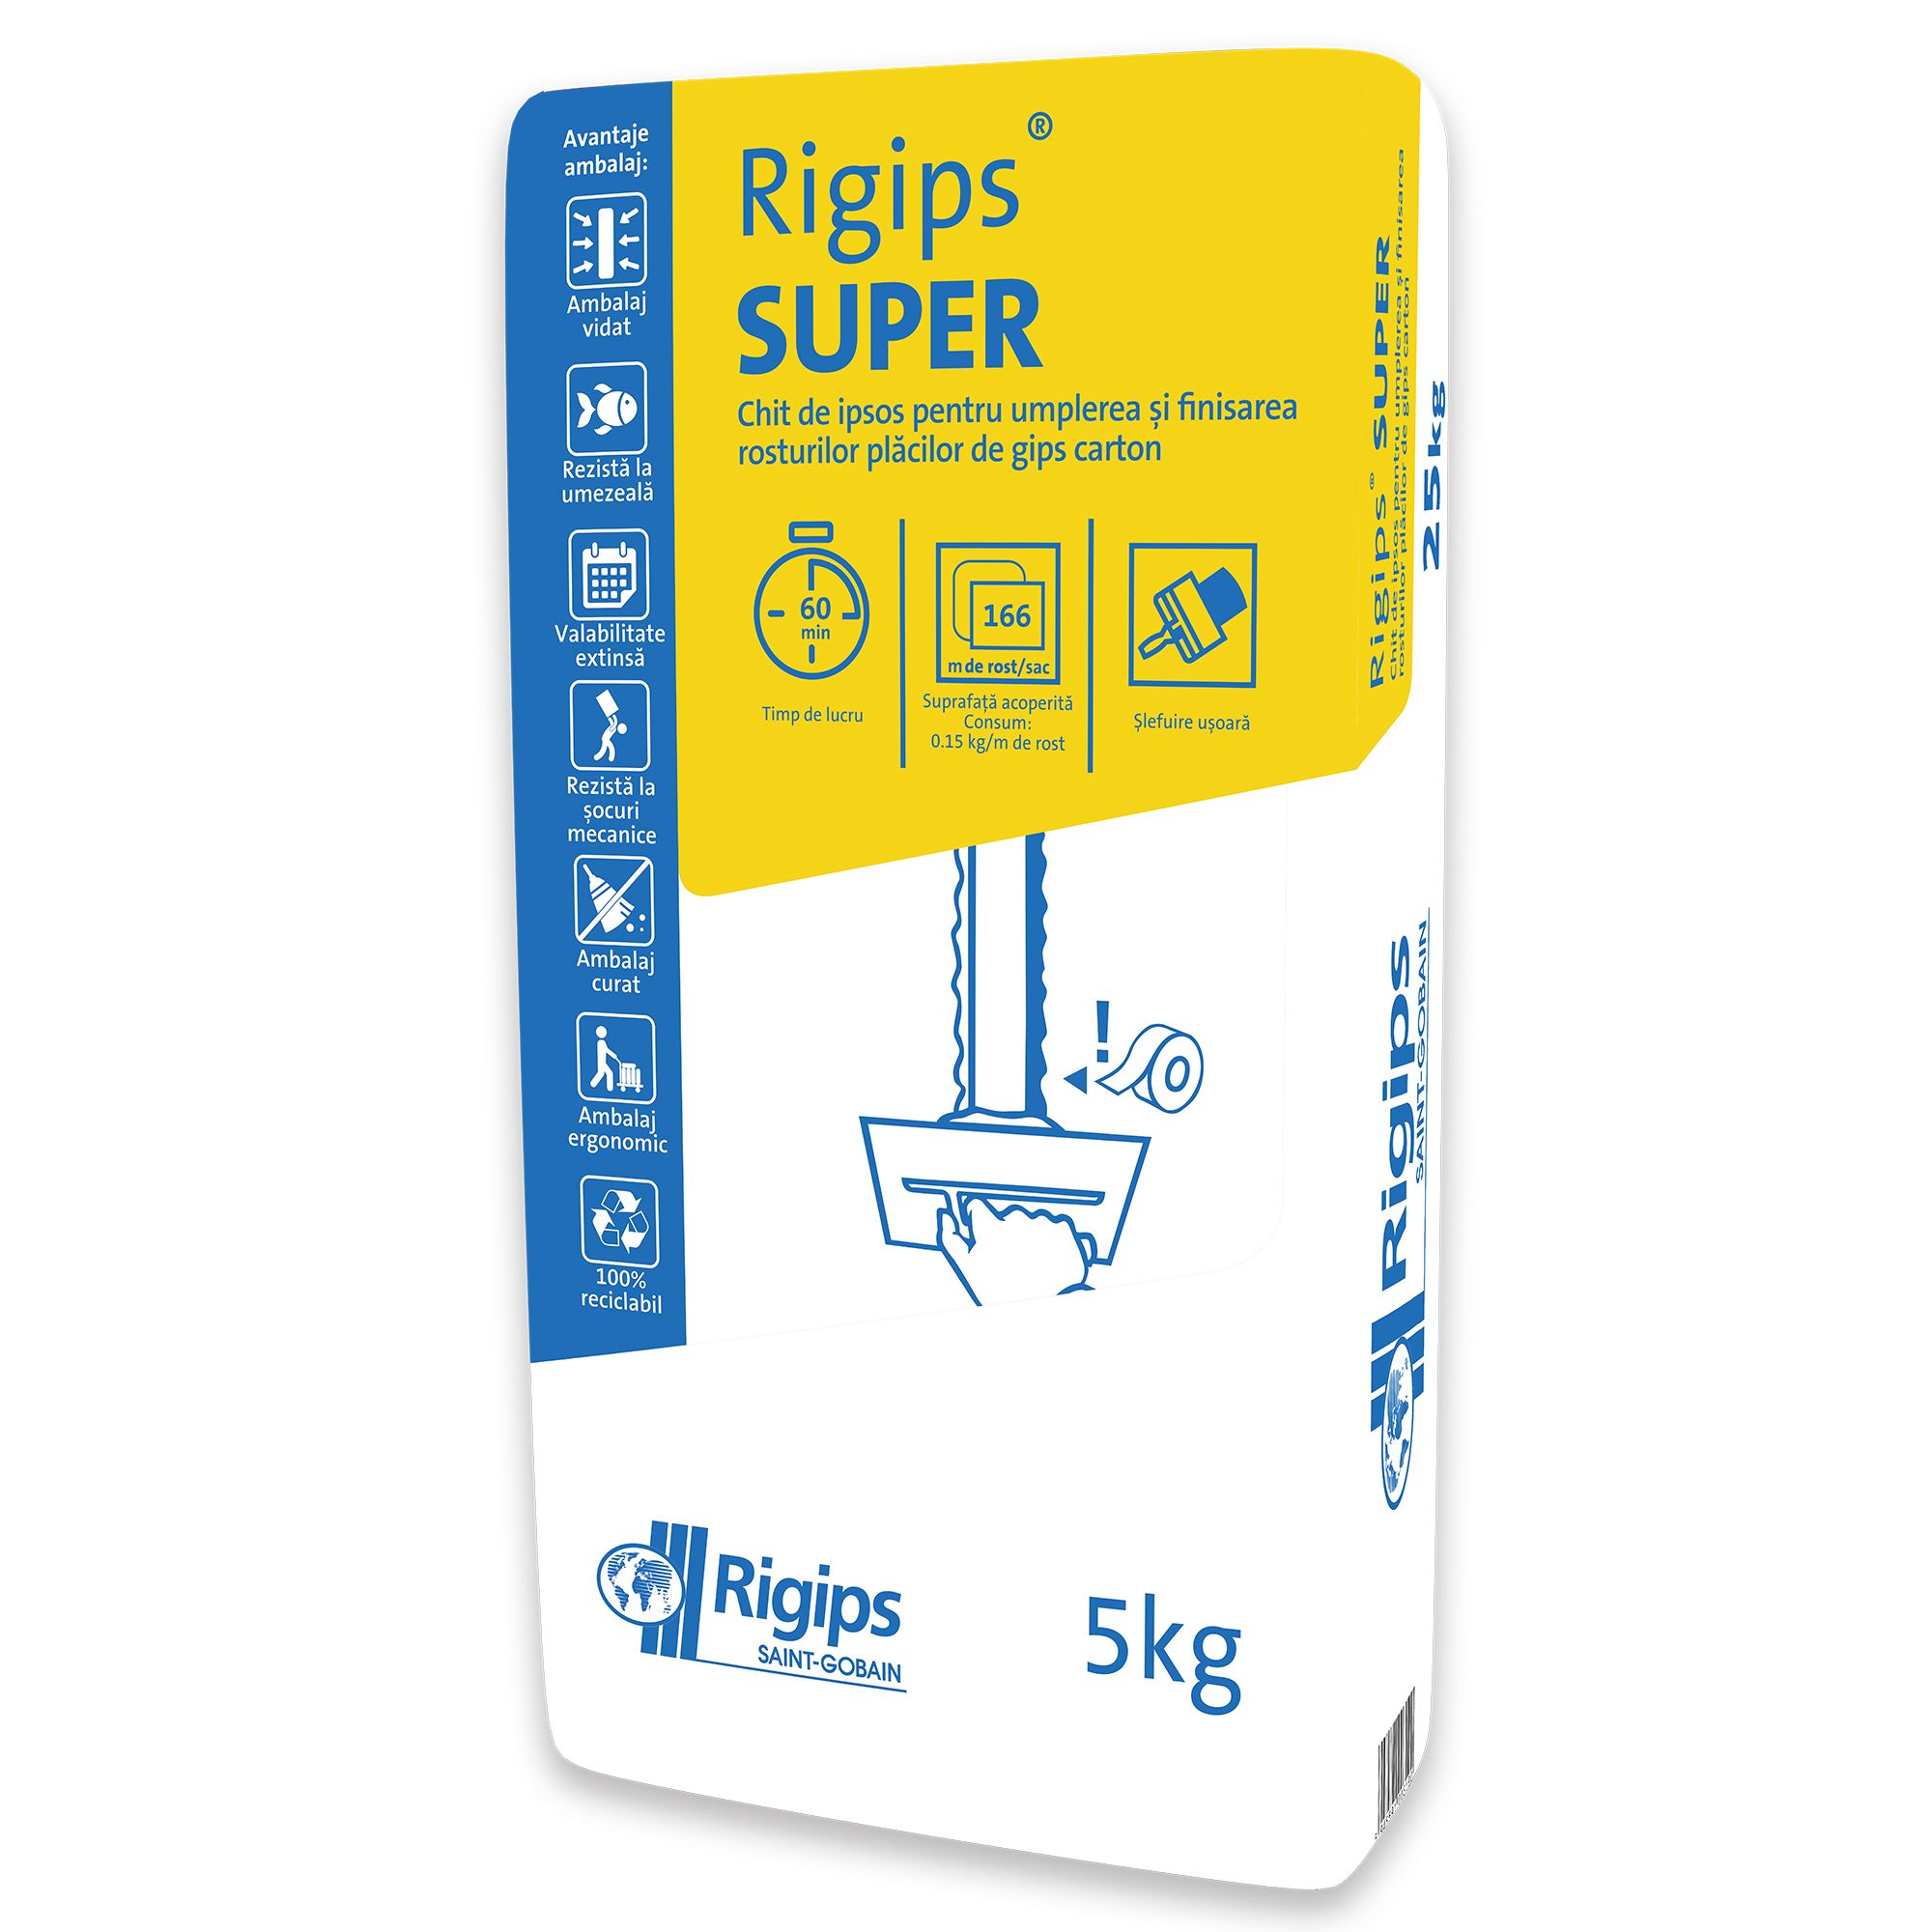 Grout joints for plasterboard - Rigips Super 5KG joint putty, https:maxbau.ro